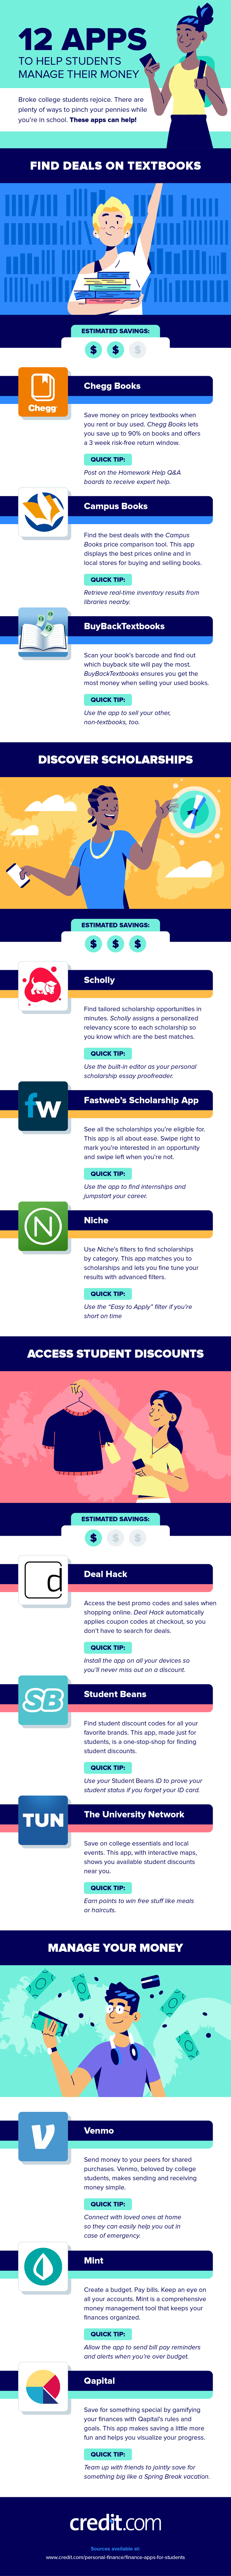 Finance apps for students infographic